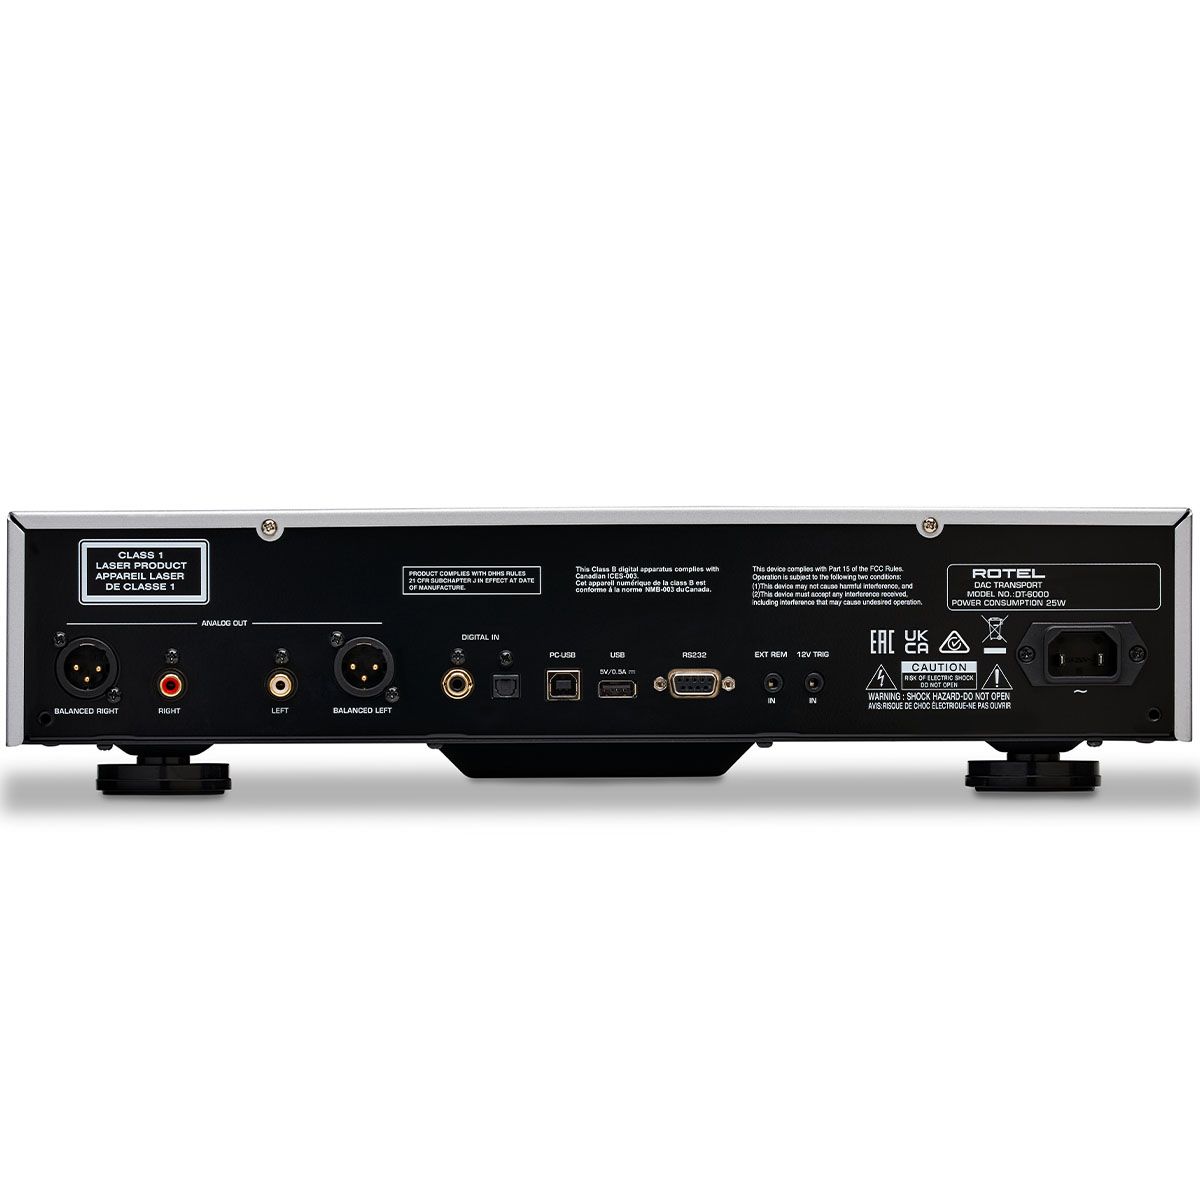 Rotel DT-6000 DAC/CD Transport - rear view